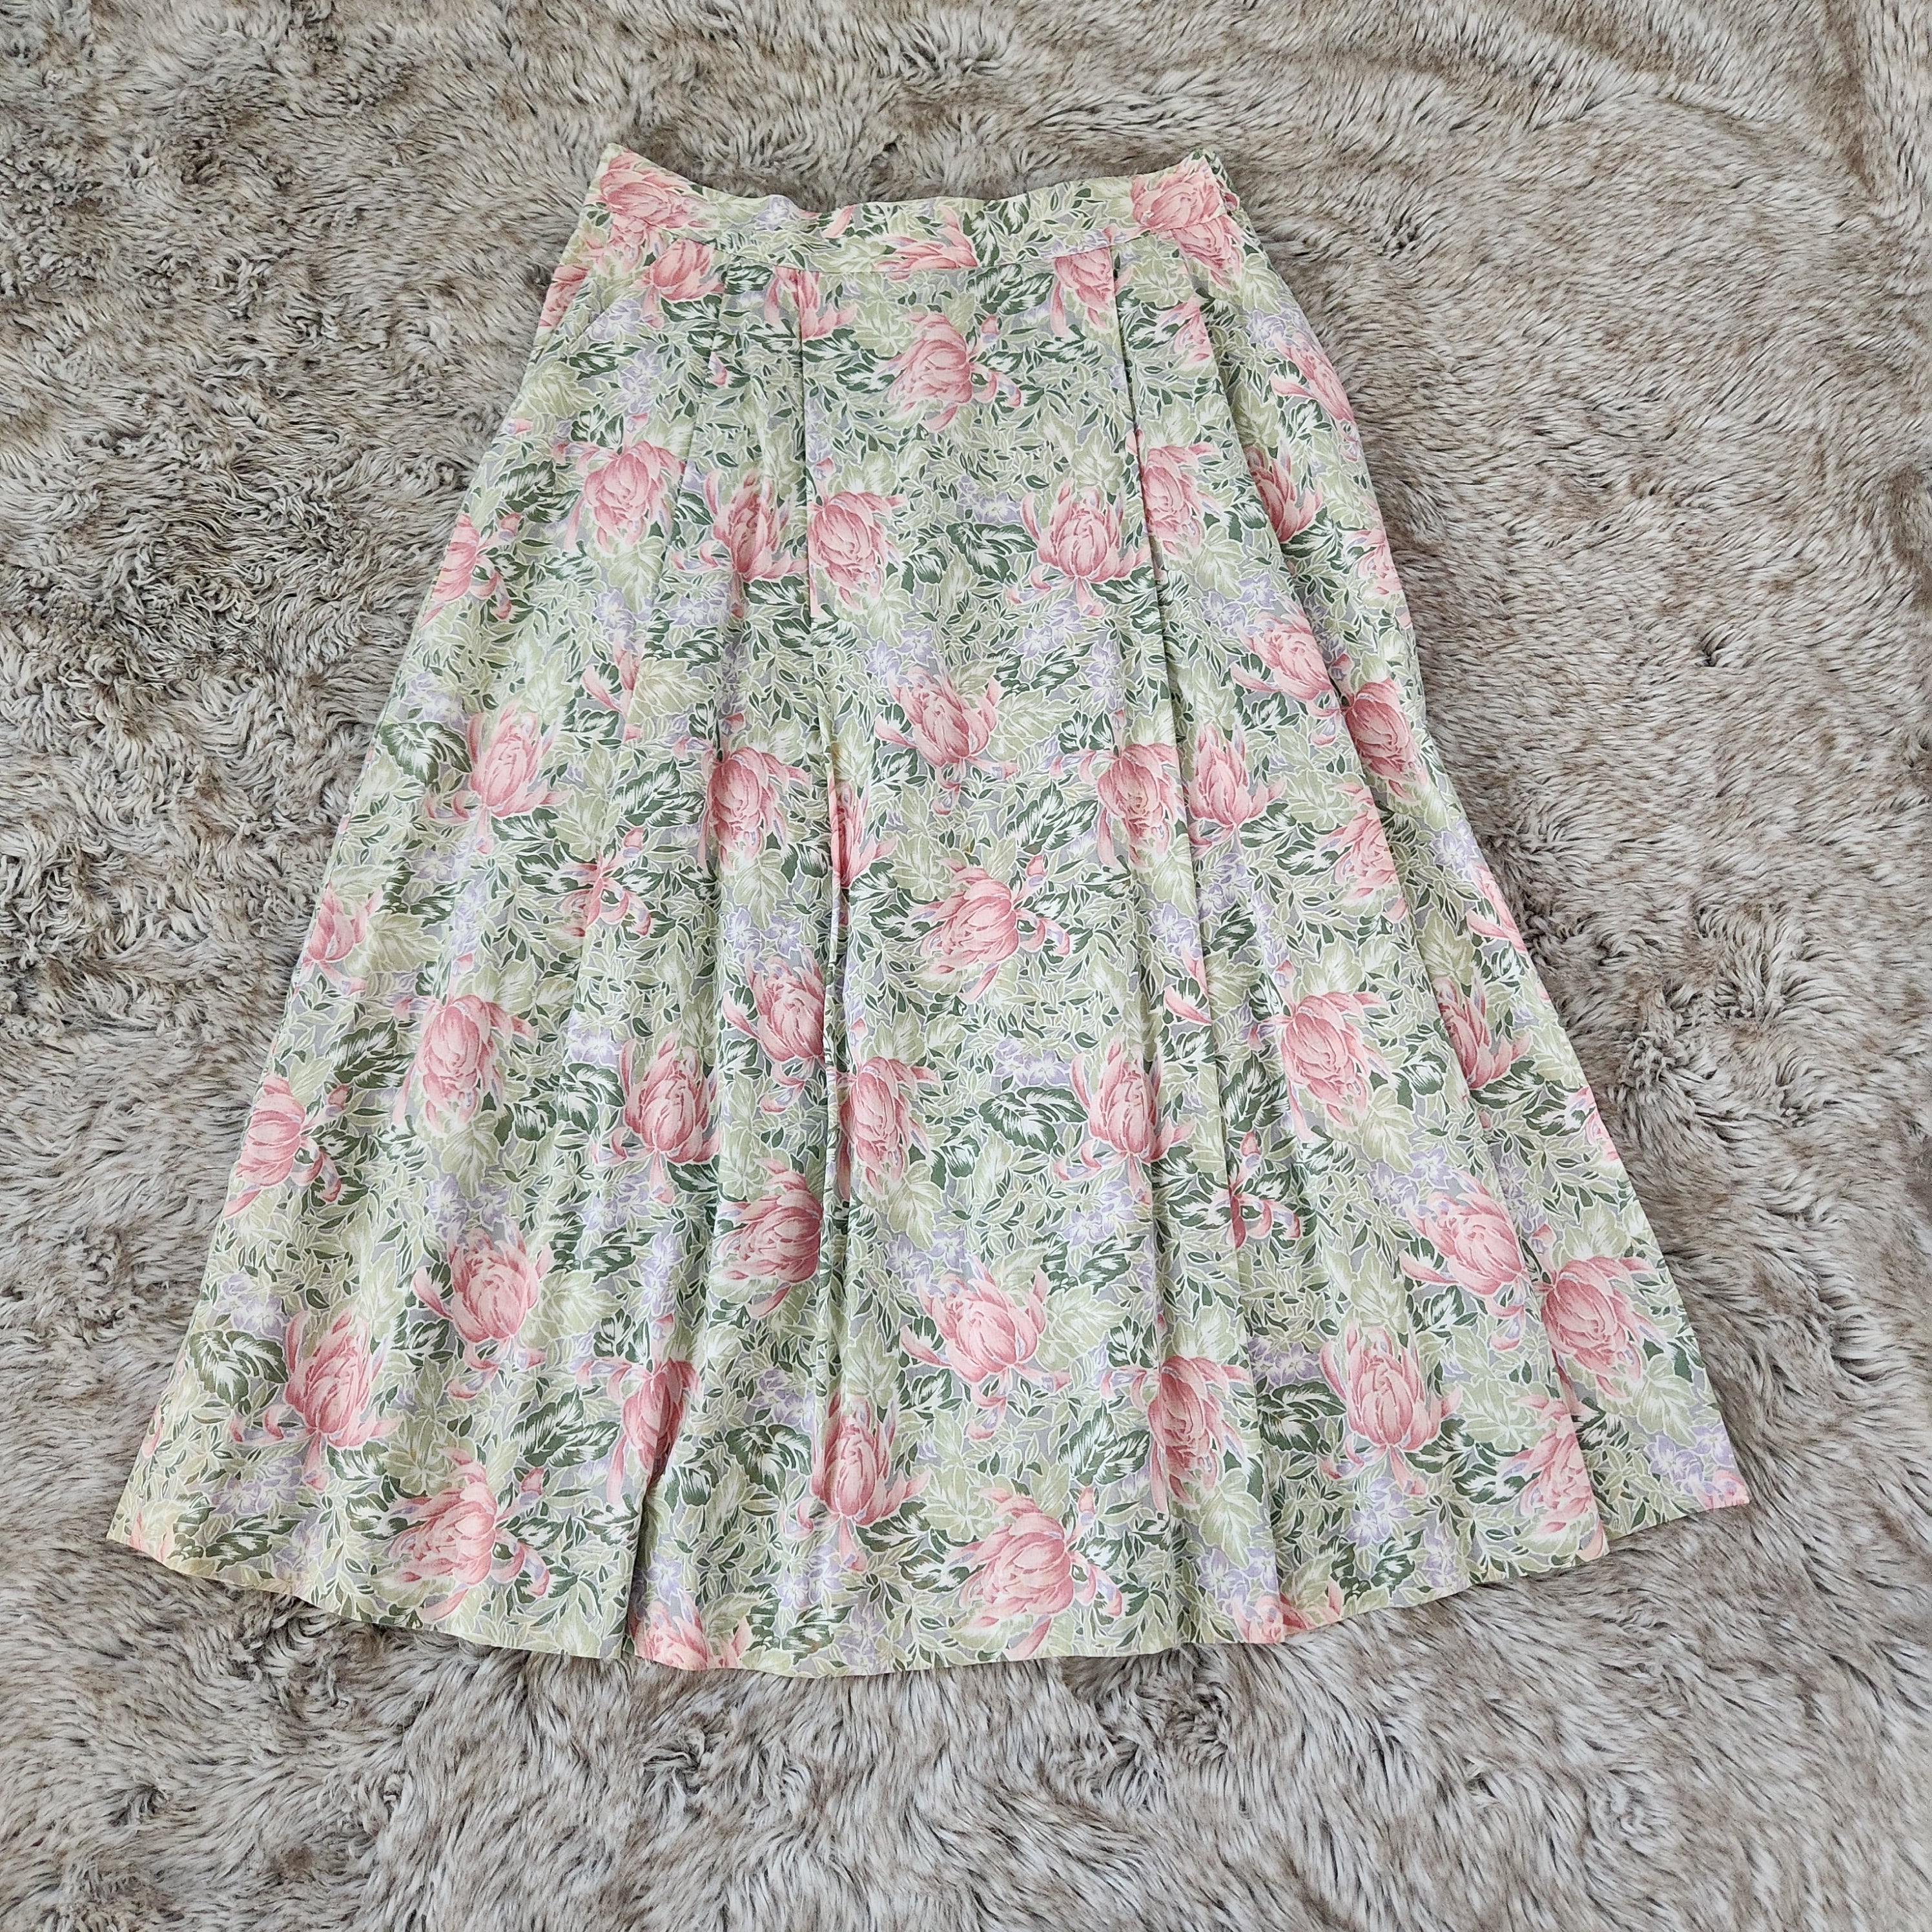 Christian Dior Chemises Vintage Floral Midi Skirt Green and Pink Size 10